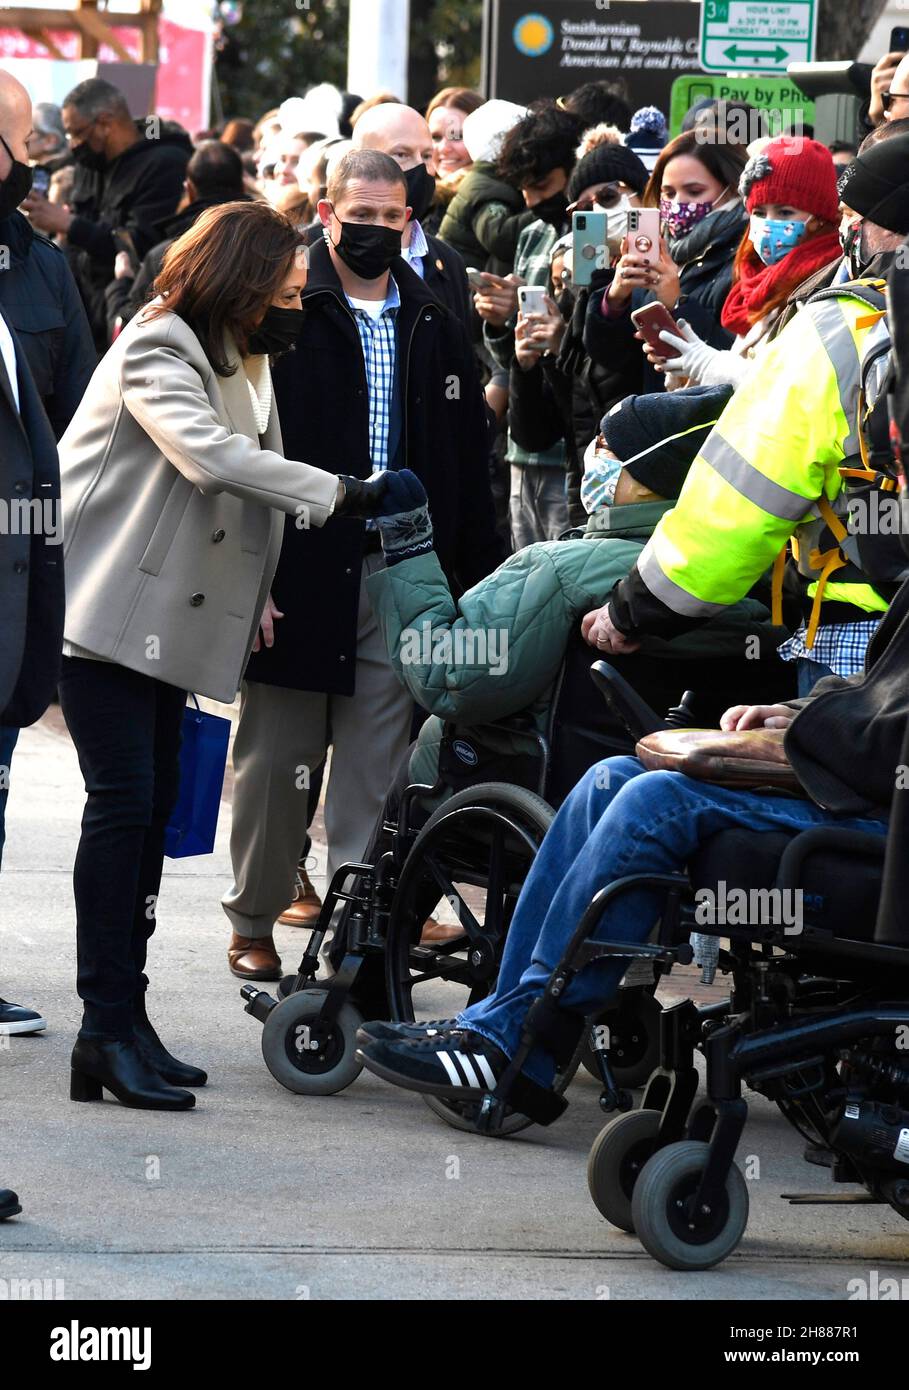 United States Vice President Kamala Harris (L) greets shoppers as she supports Small Business Saturday with a visit to DC’s Downtown Holiday Market, Saturday, November 27, 2021, in Washington, DC.Credit: Mike Theiler / Pool via CNP /MediaPunch Stock Photo